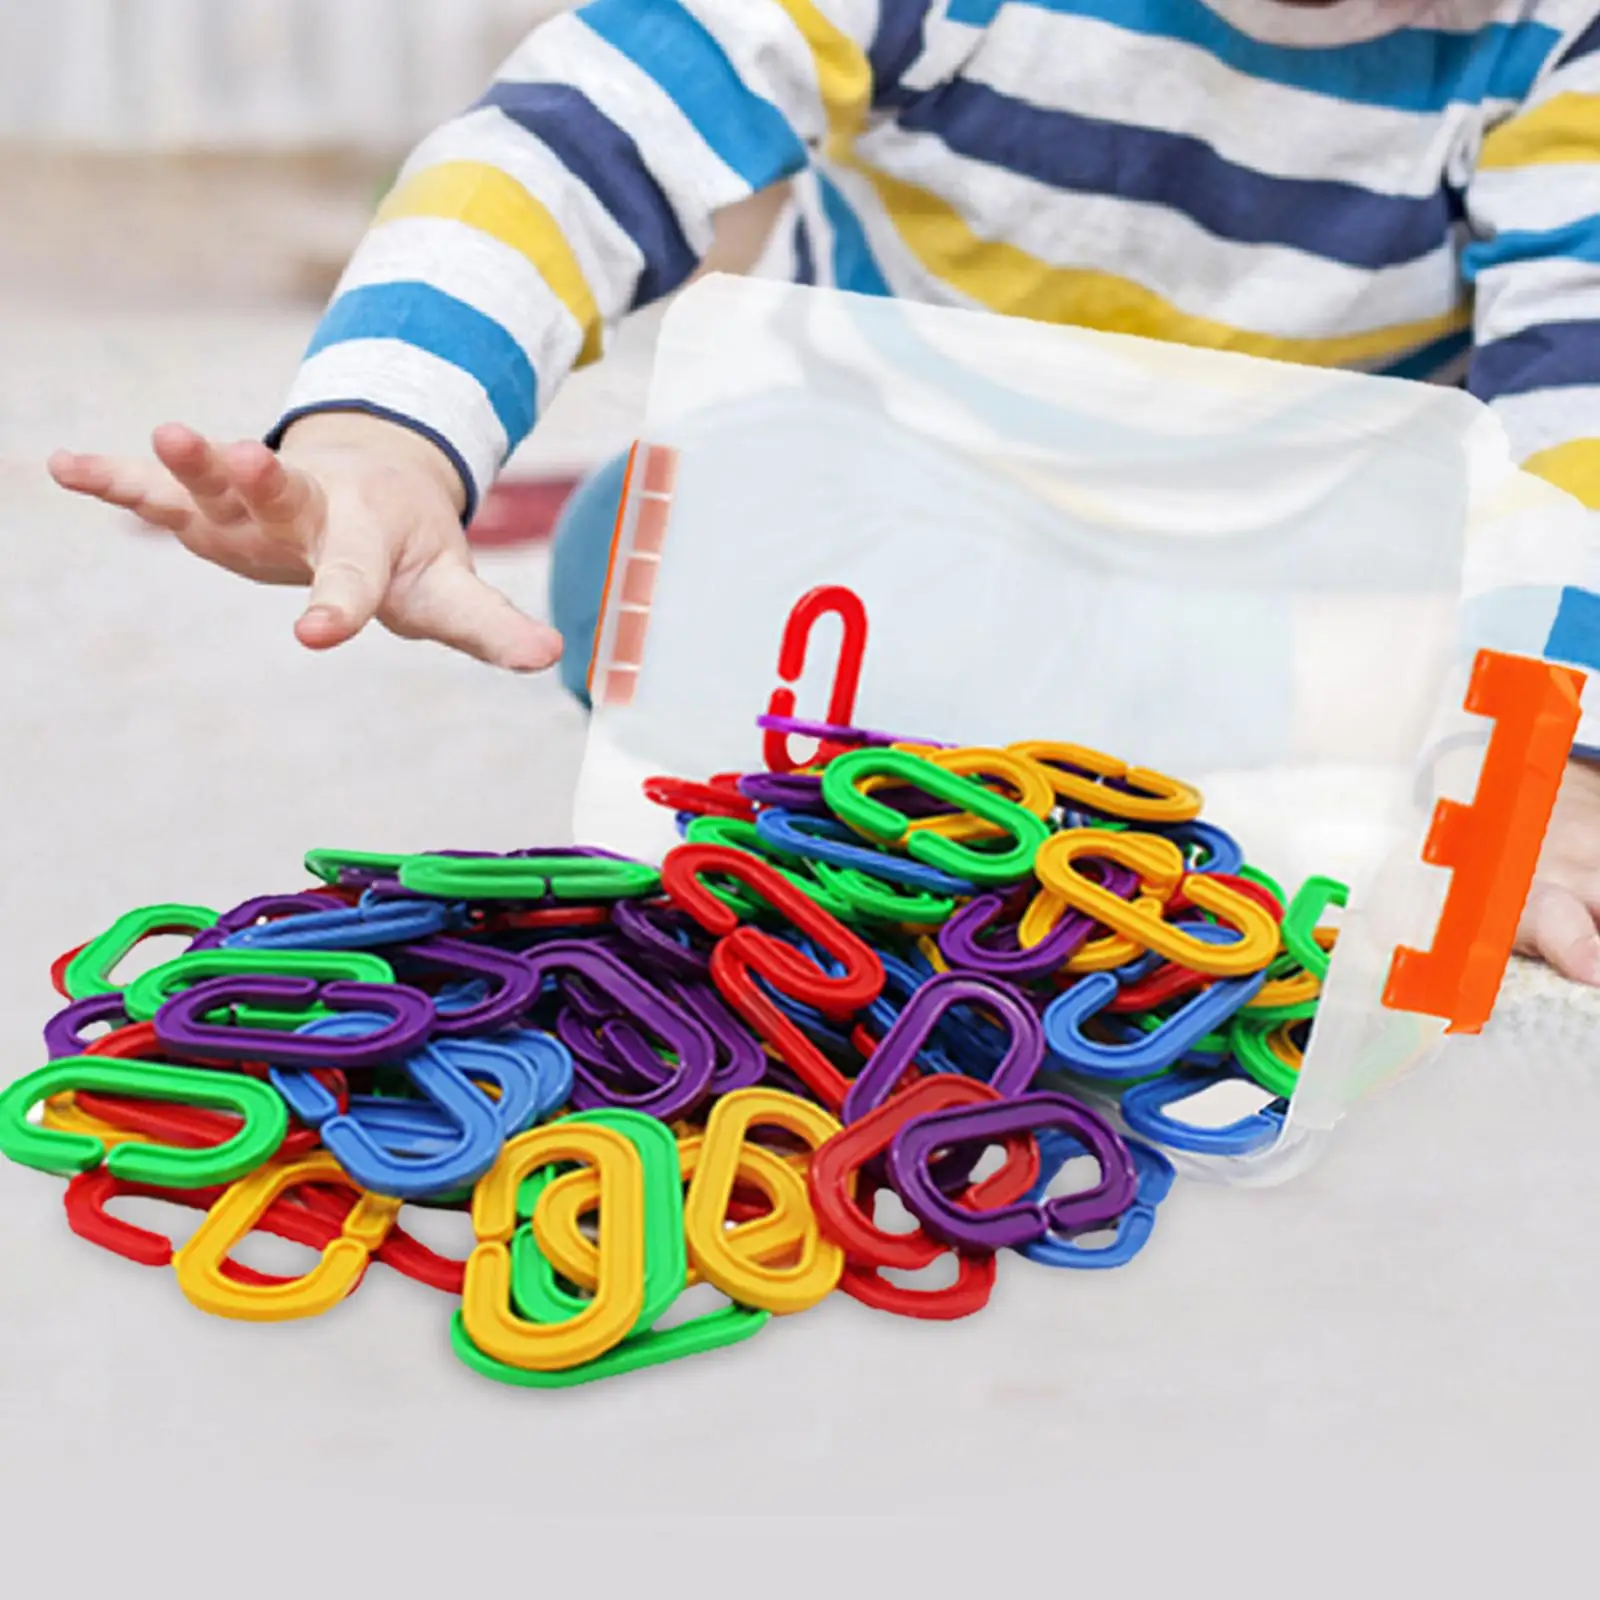 150 Pieces C Hook, Rainbow C Links DIY Toys Bird Swing Chain Educational Colorful Links for Playroom=